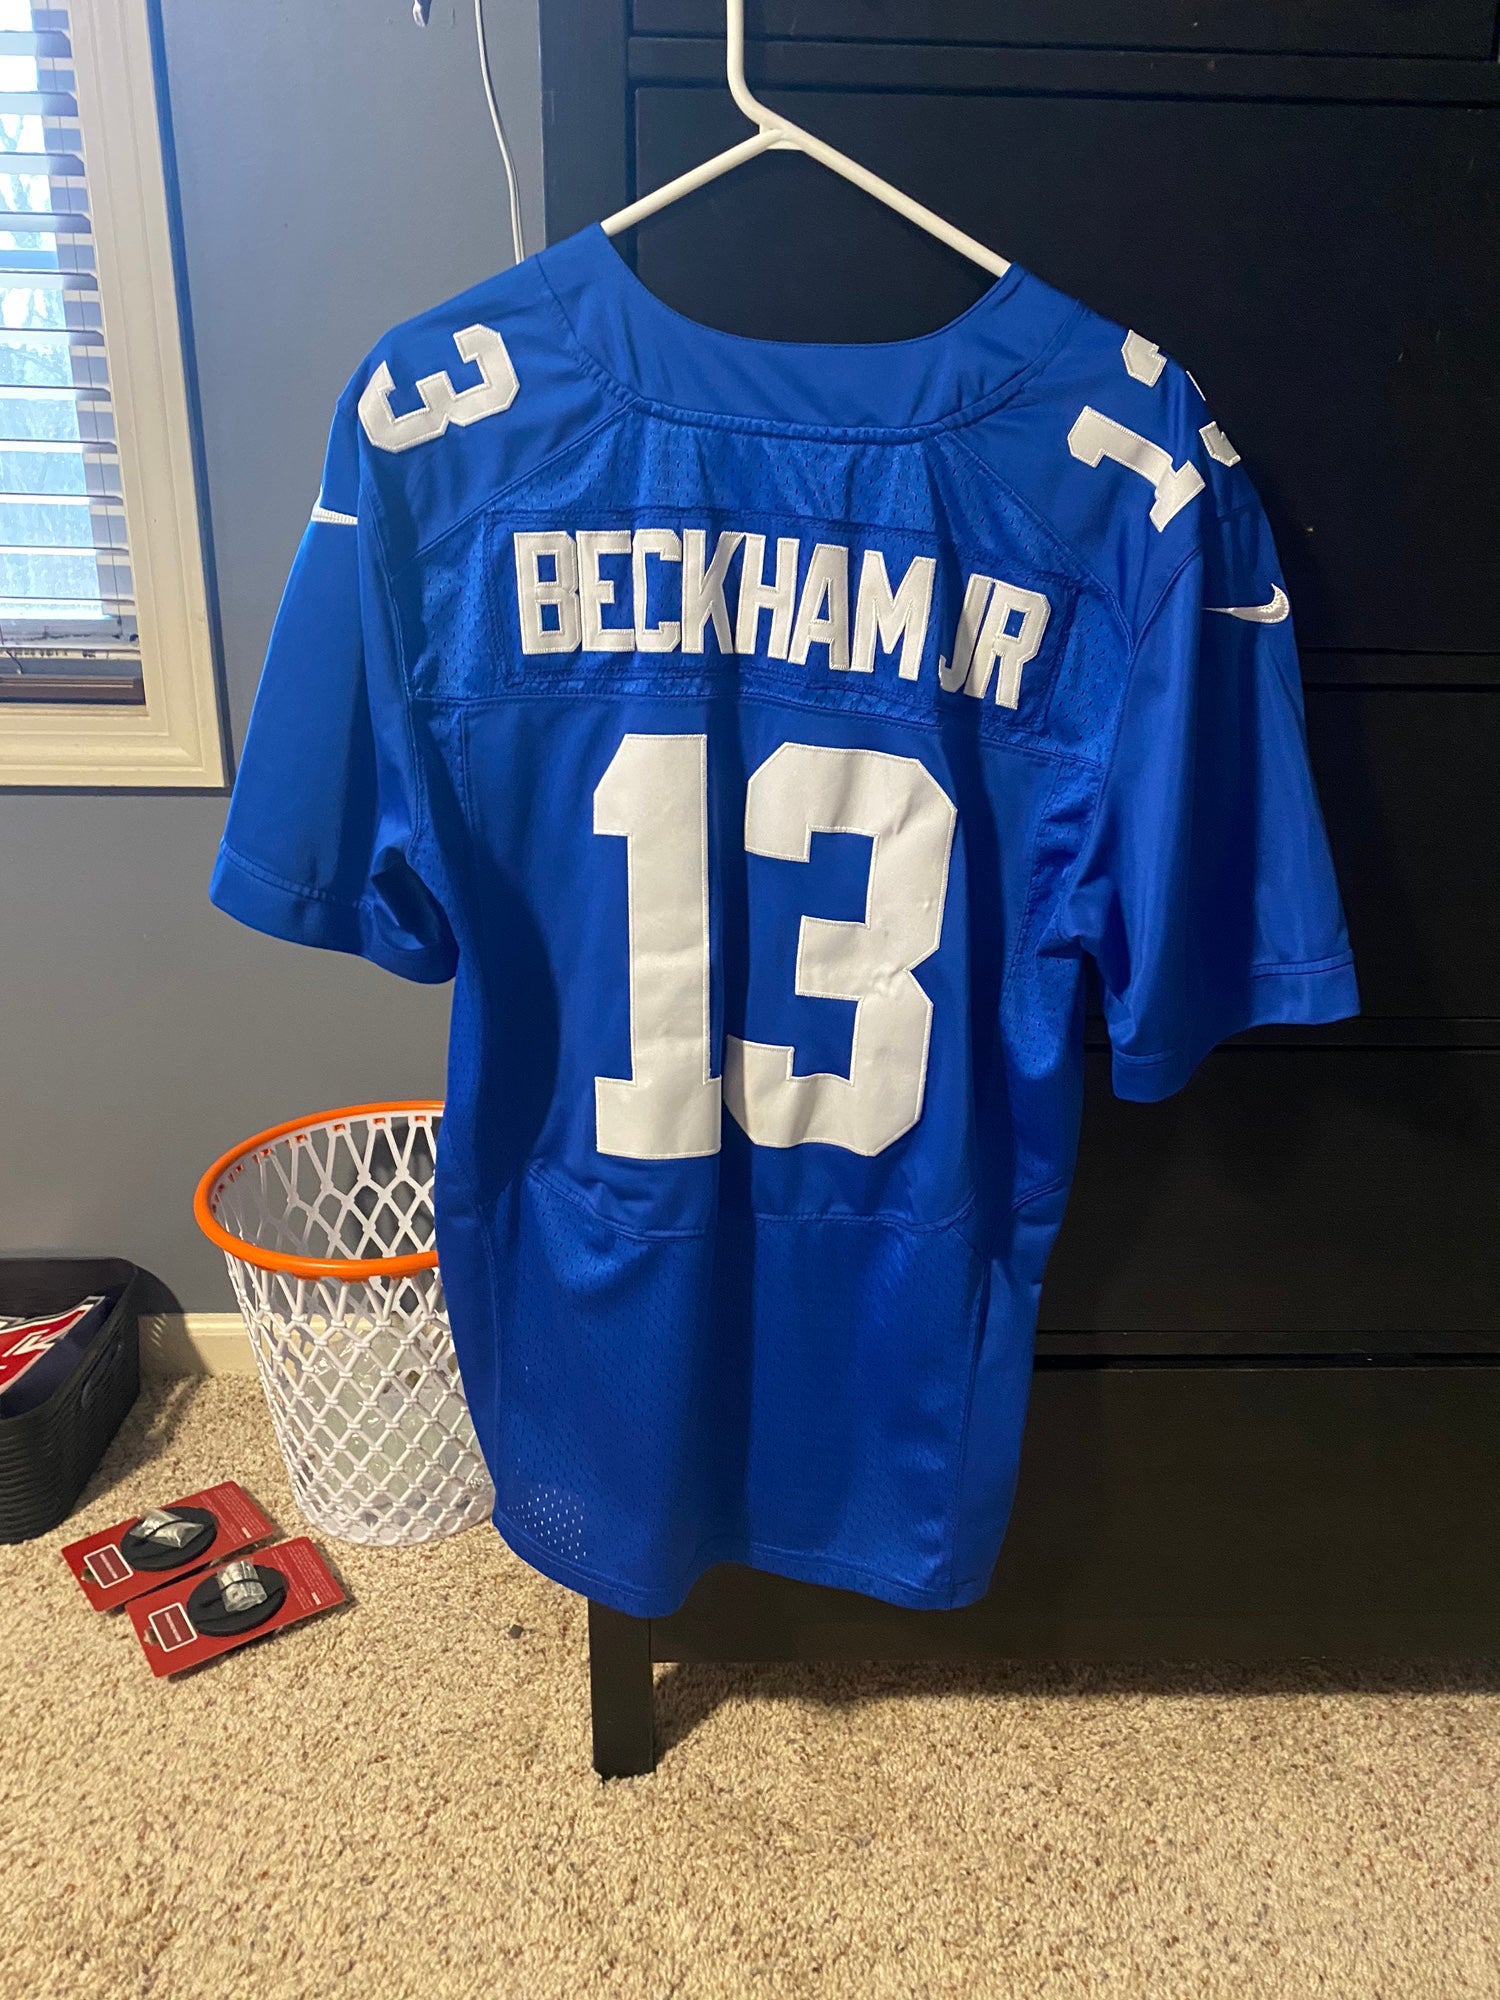 Mitchell And Ness NFL New York Giants Beckham Jr Jersey for Sale